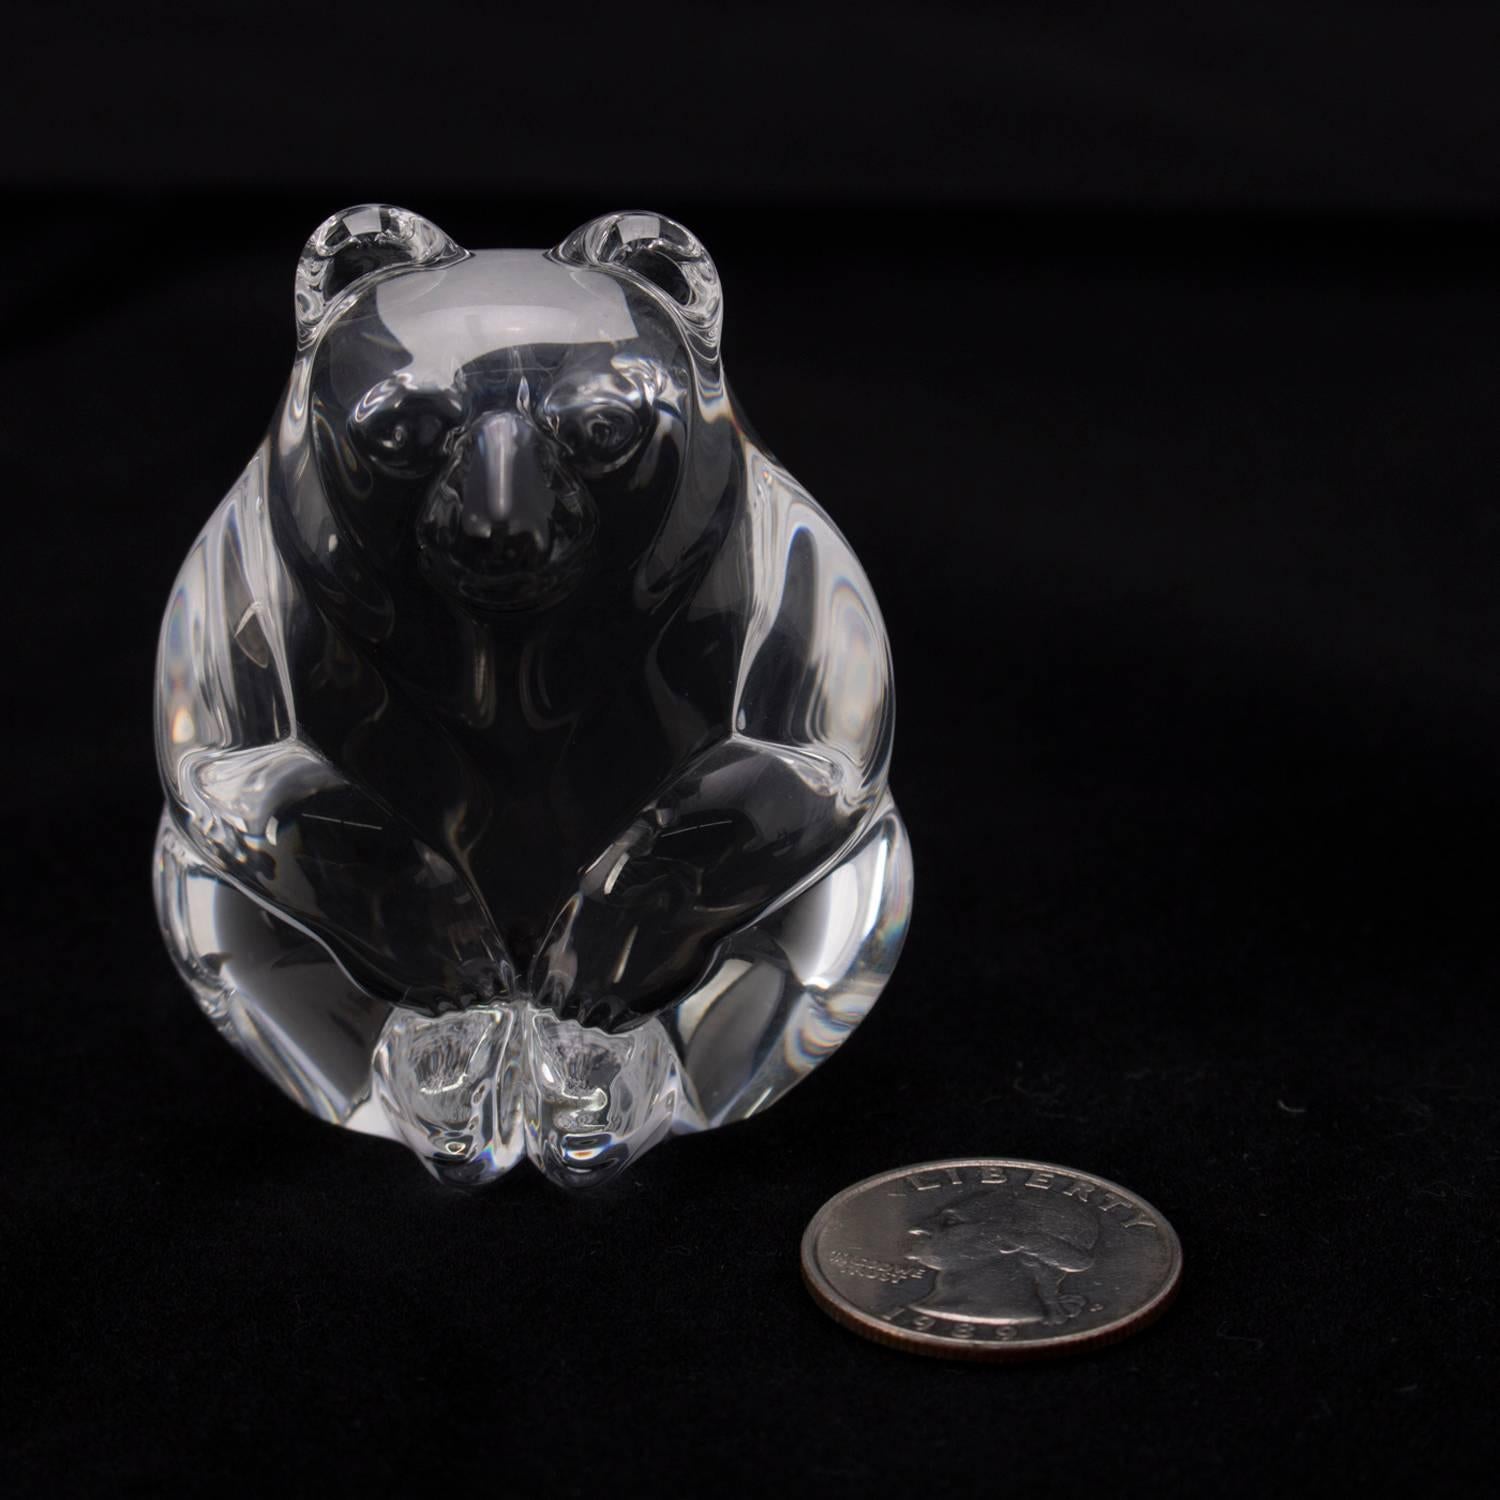 Miniature art glass crystal figural sculpture figurine of bear by Steuben, signed on base, 20th century

 ***DELIVERY NOTICE – Due to COVID-19 we are employing NO-CONTACT PRACTICES in the transfer of purchased items.  Additionally, for those who